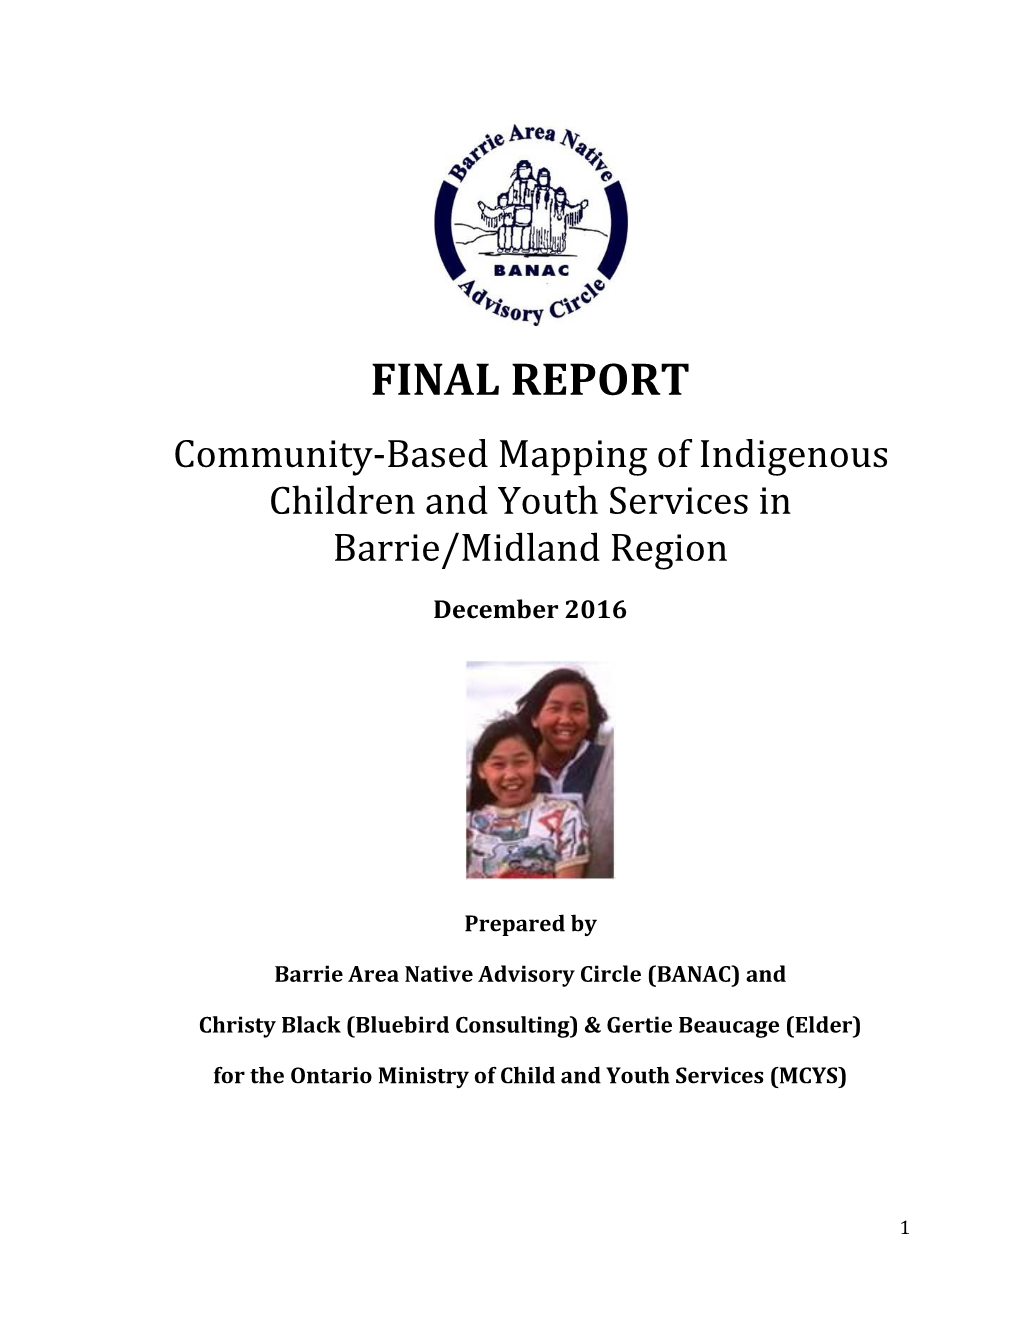 FINAL REPORT Community-Based Mapping of Indigenous Children and Youth Services in Barrie/Midland Region